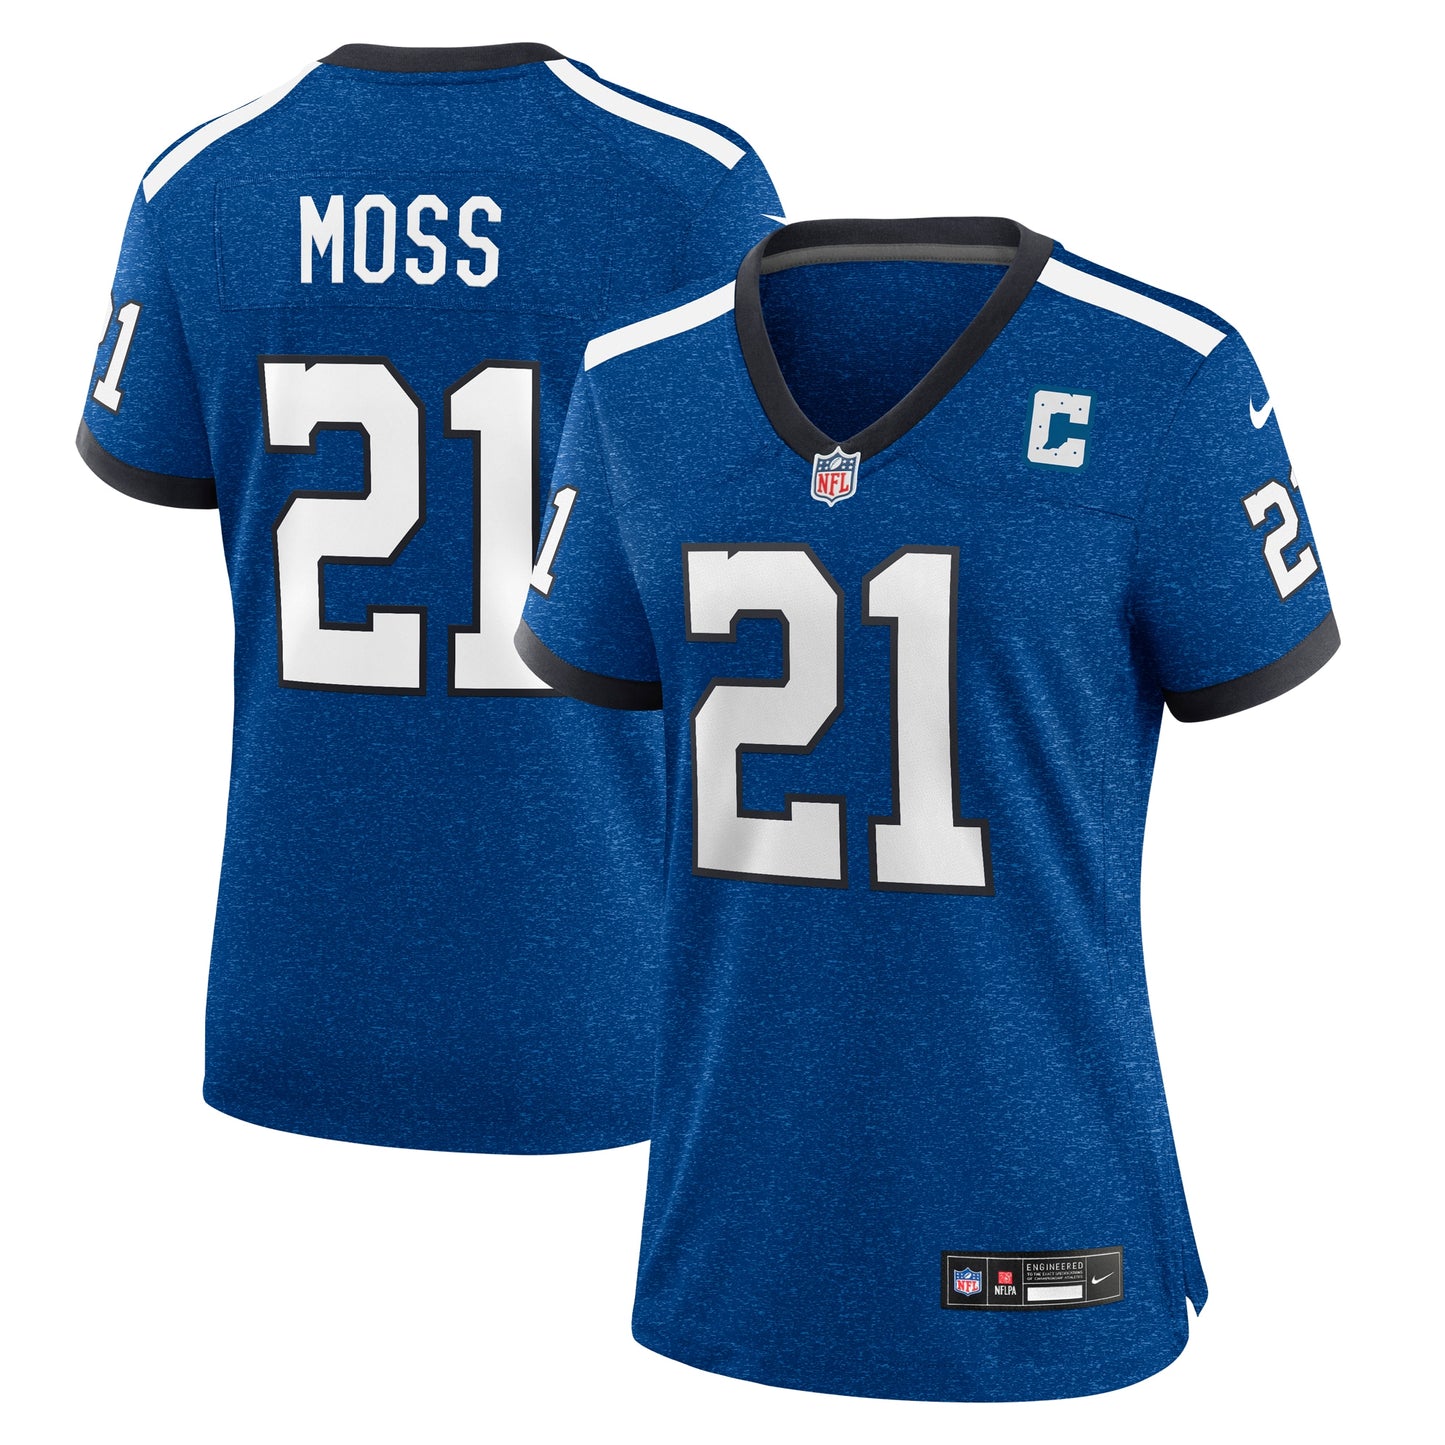 Zack Moss Indianapolis Colts Nike Women's Indiana Nights Alternate Game Jersey - Royal